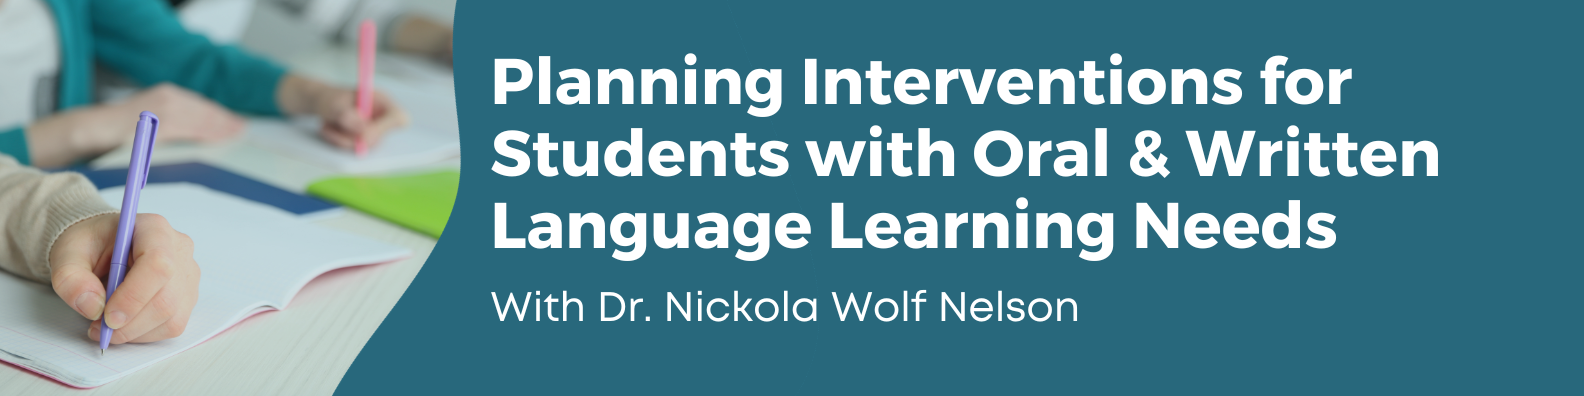 Planning Interventions for Students with Oral and Written Language Learning Needs. With Dr. Nickola Wolf Nelson